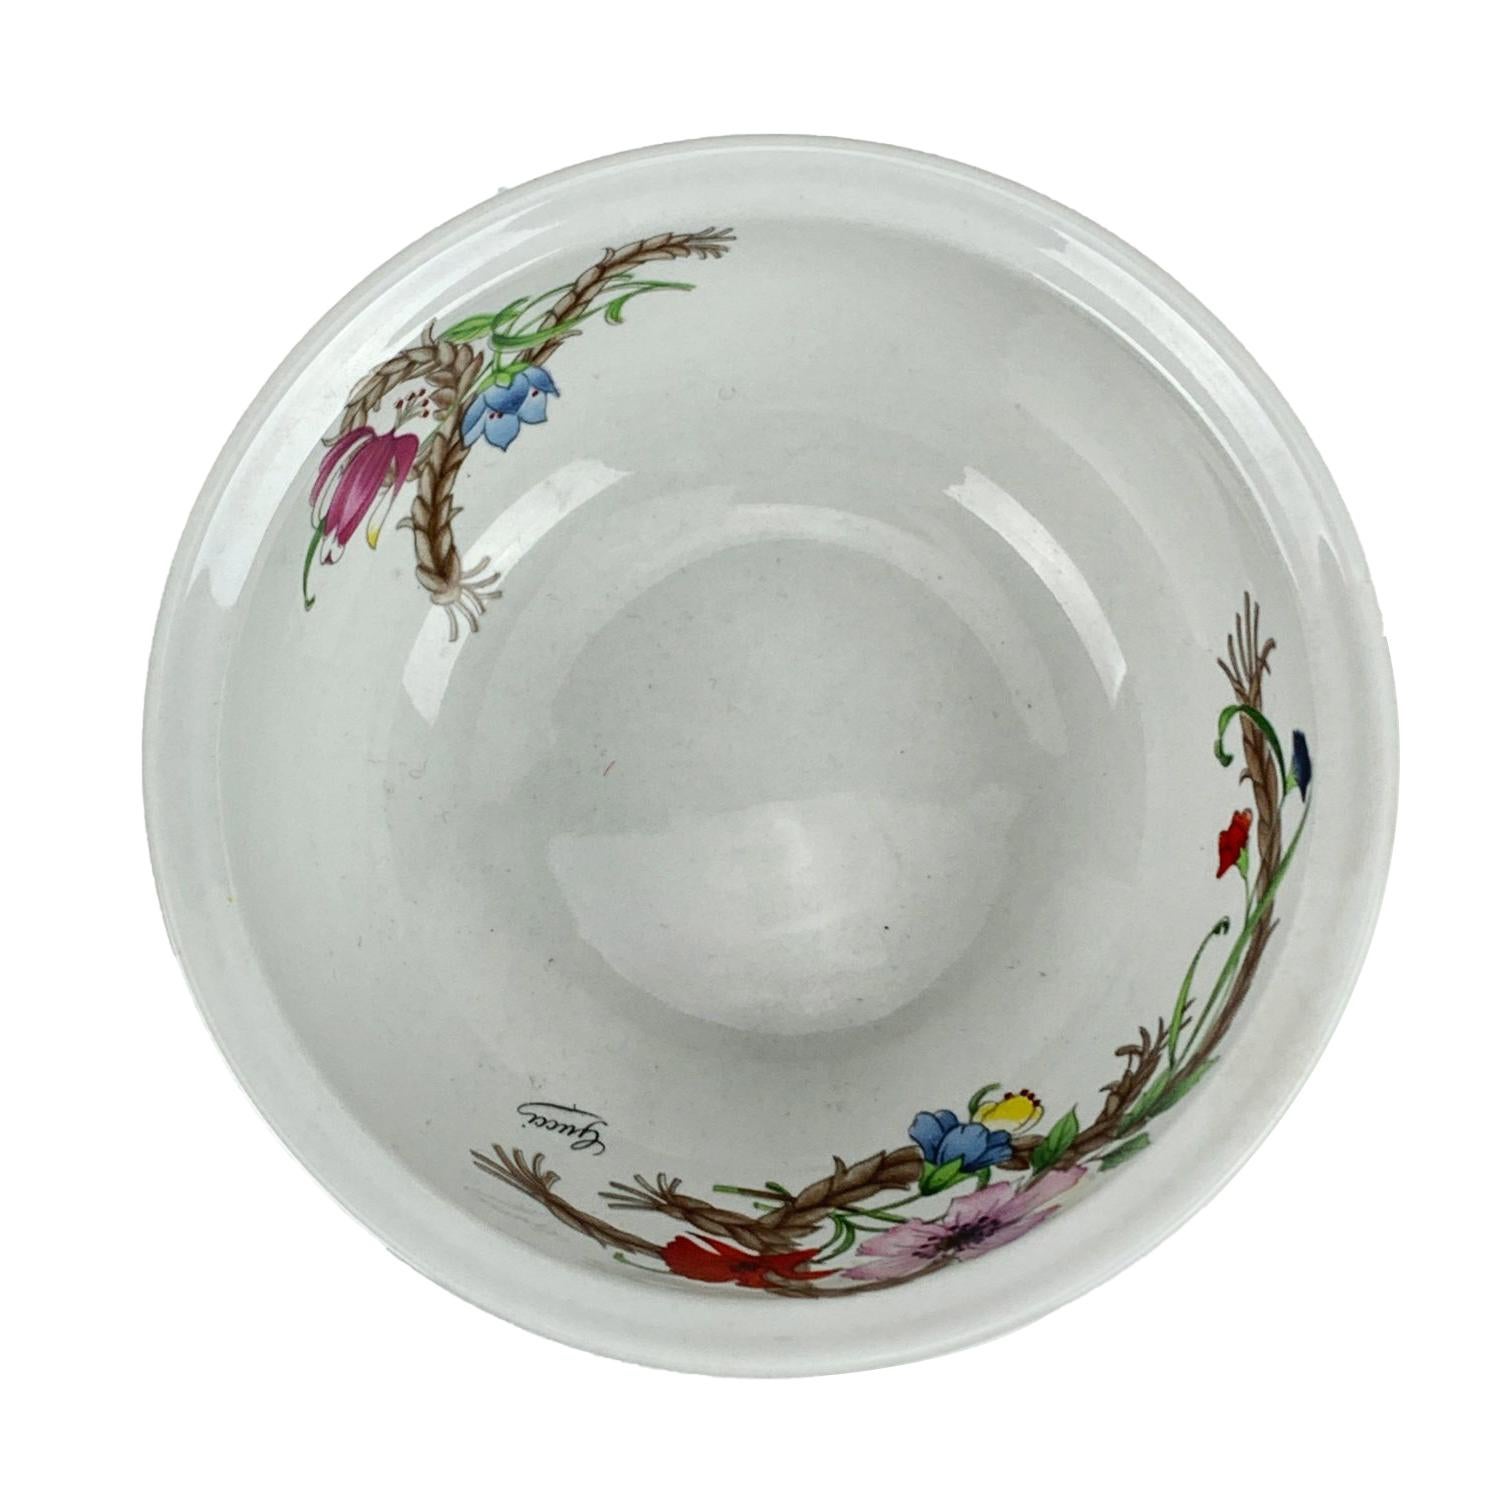 Gucci Vintage small bowl, from the 'Cesti e Nastri' line. Designed by Mancioli - Made in Italy. White porcelain with multicolored flowers and butterflies design. Flame resistant and microwave and dishwasher safe. Gucci signature on top and Gucci